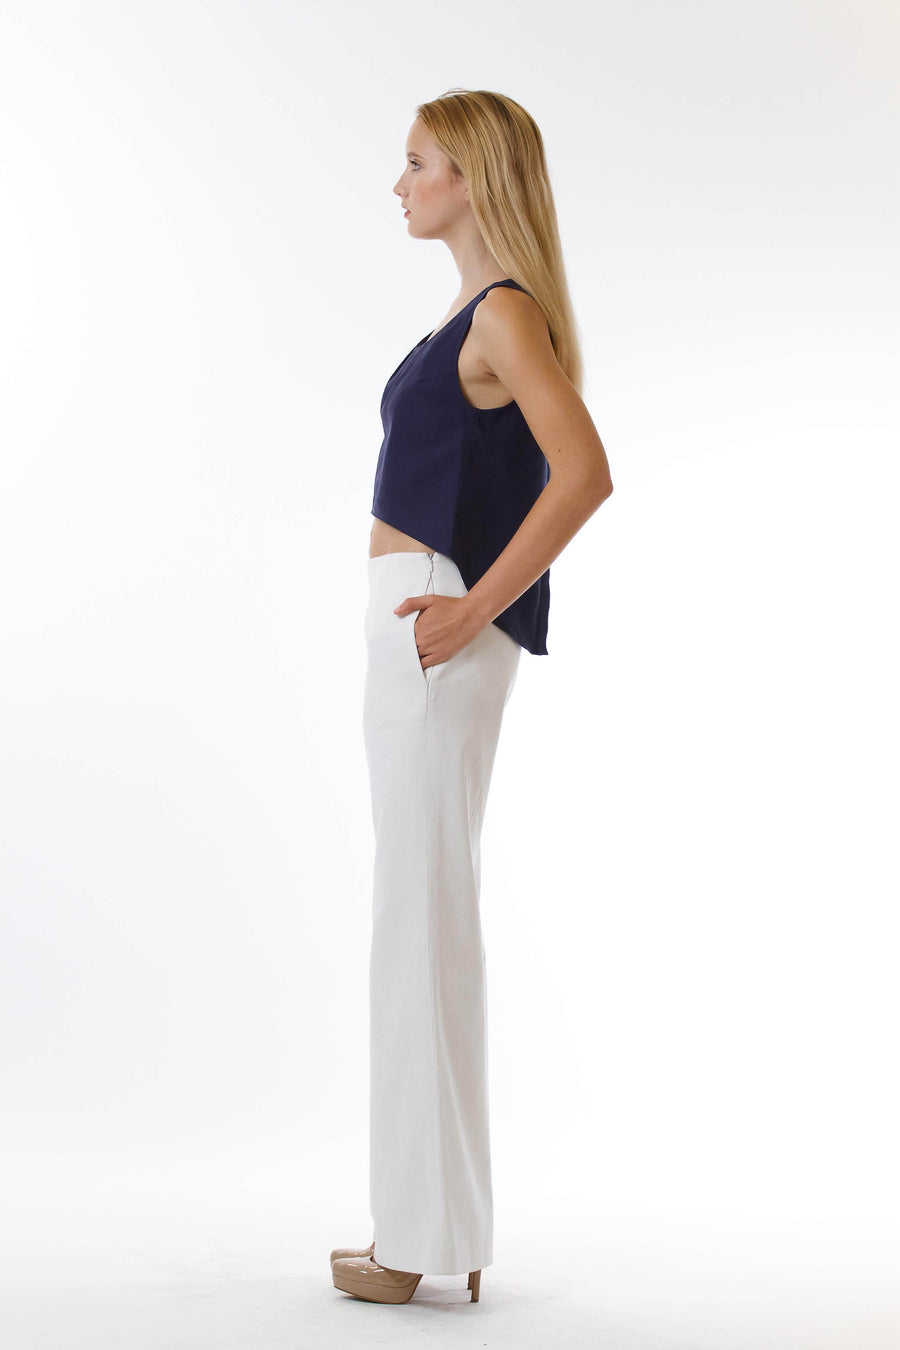 Womens White Long Pants and Navy Fishtail Tank front view